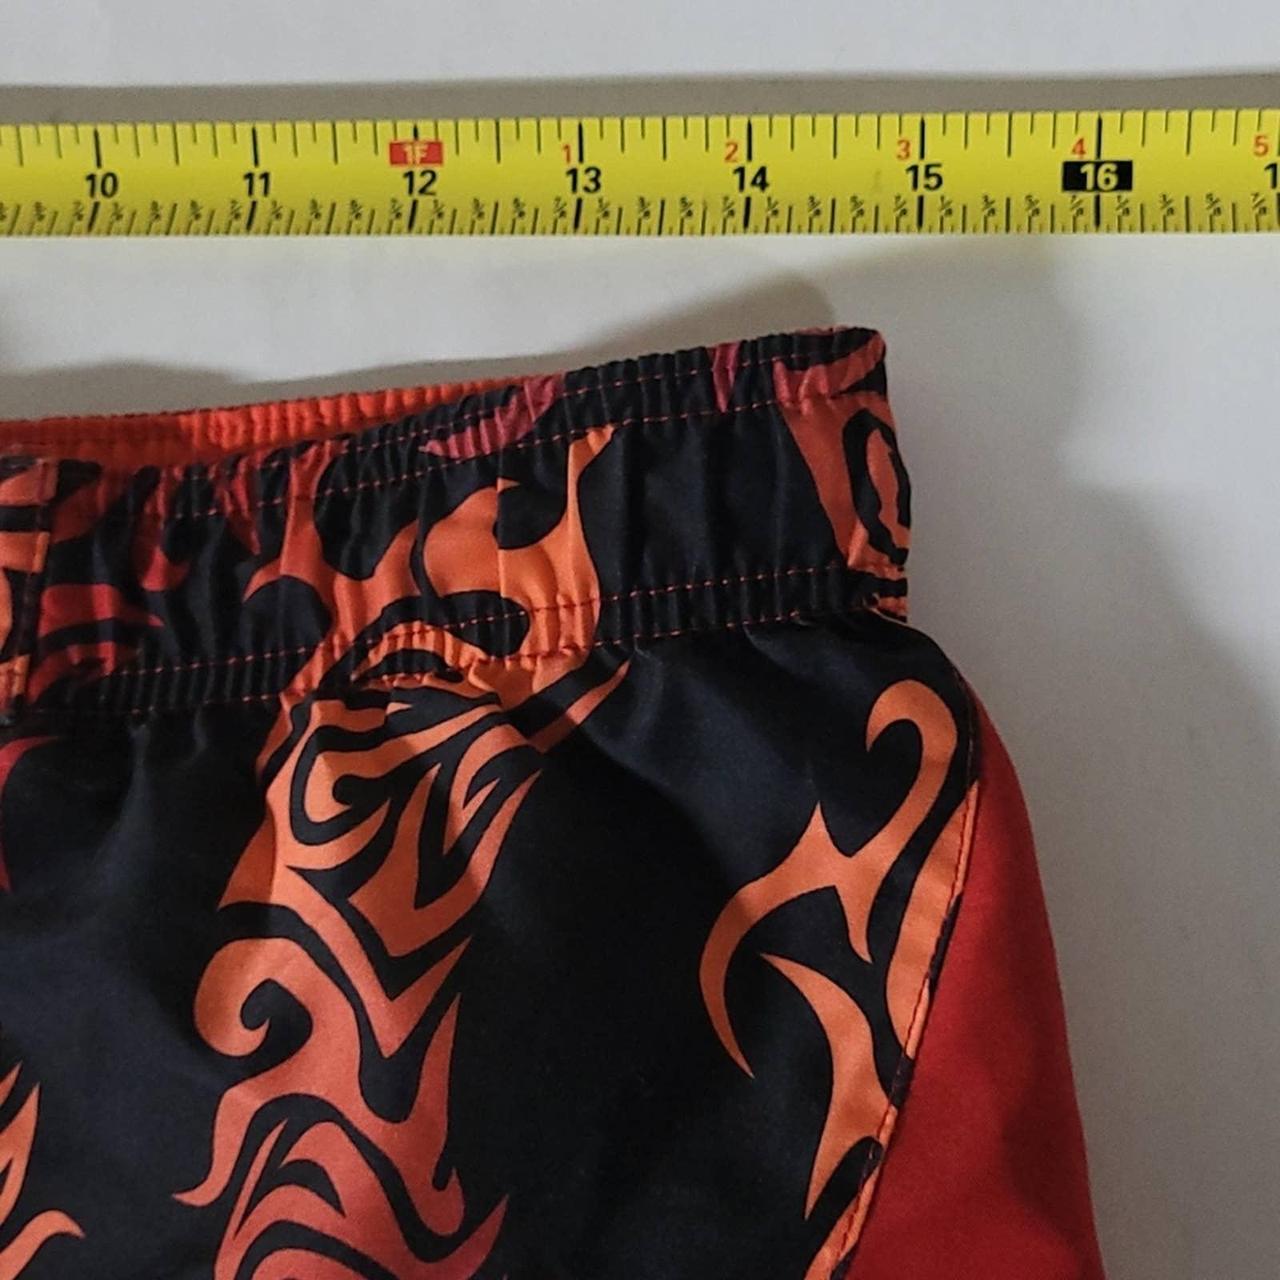 Nike Men's Red and Black Swim-briefs-shorts (3)